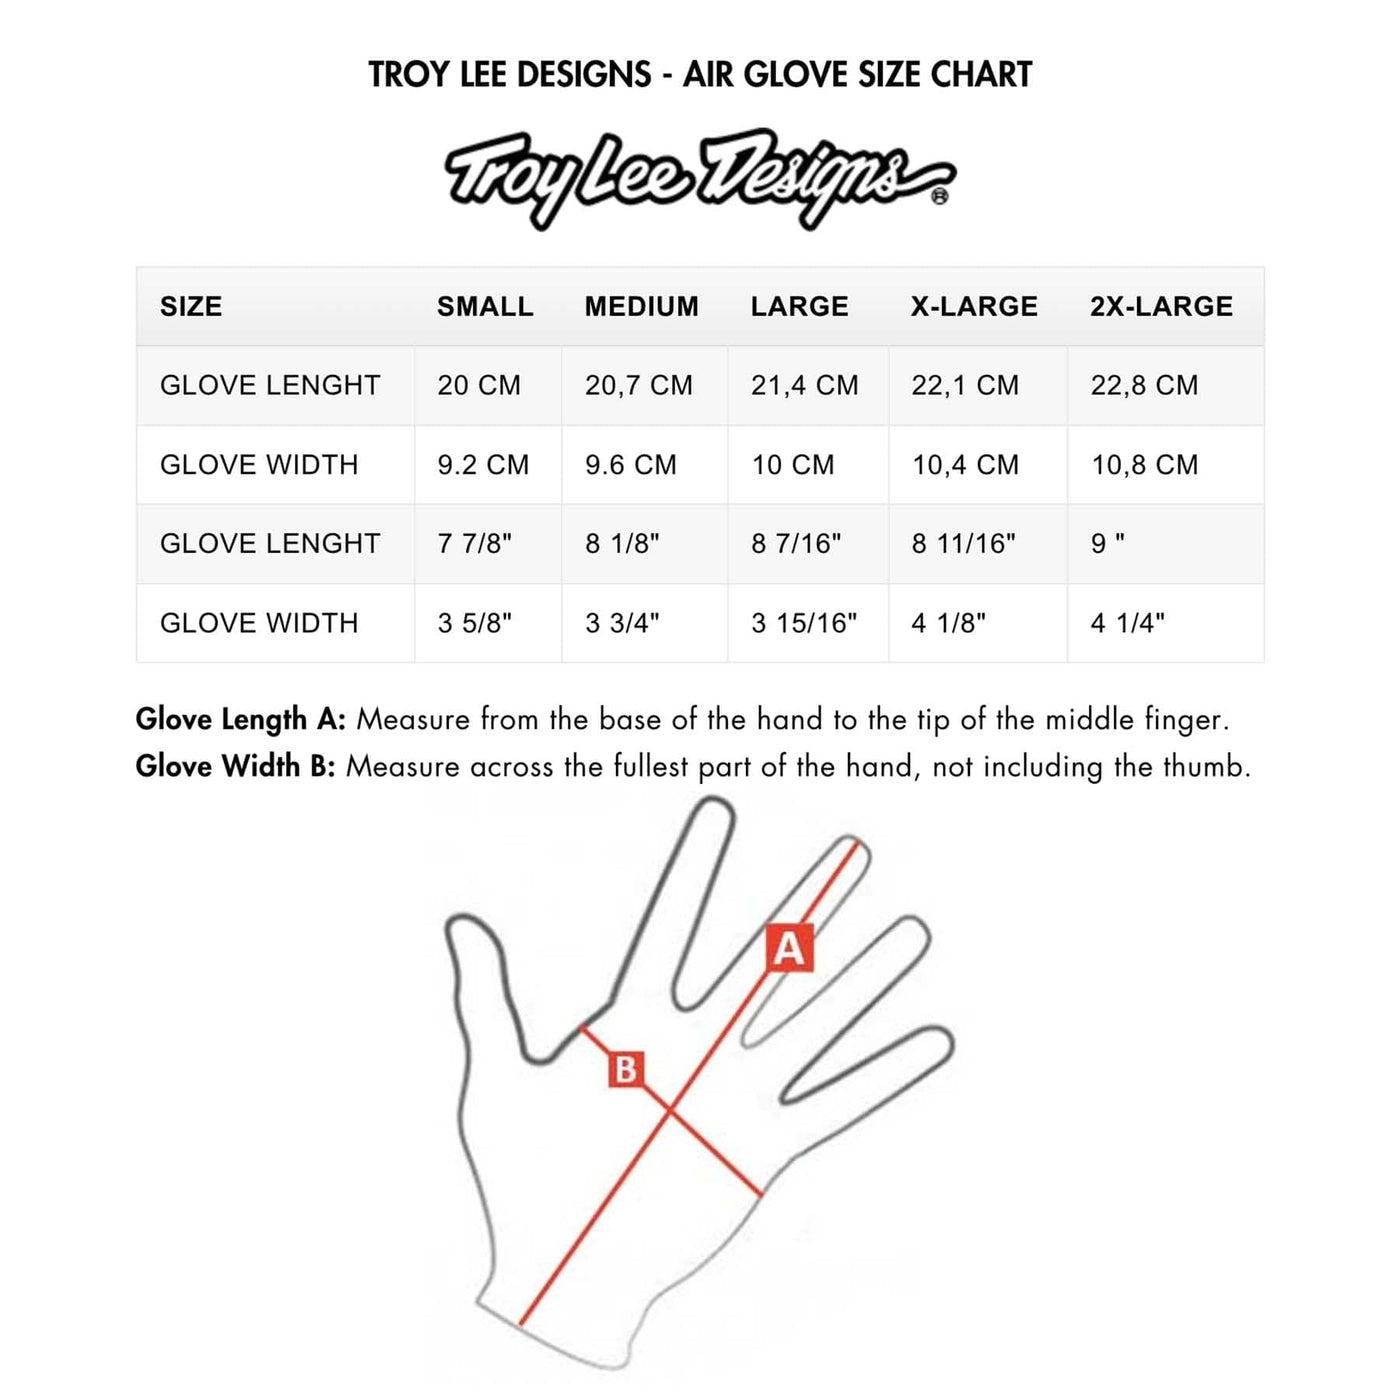 TROY LEE DESIGNS - AIR GLOVE SIZE CHART